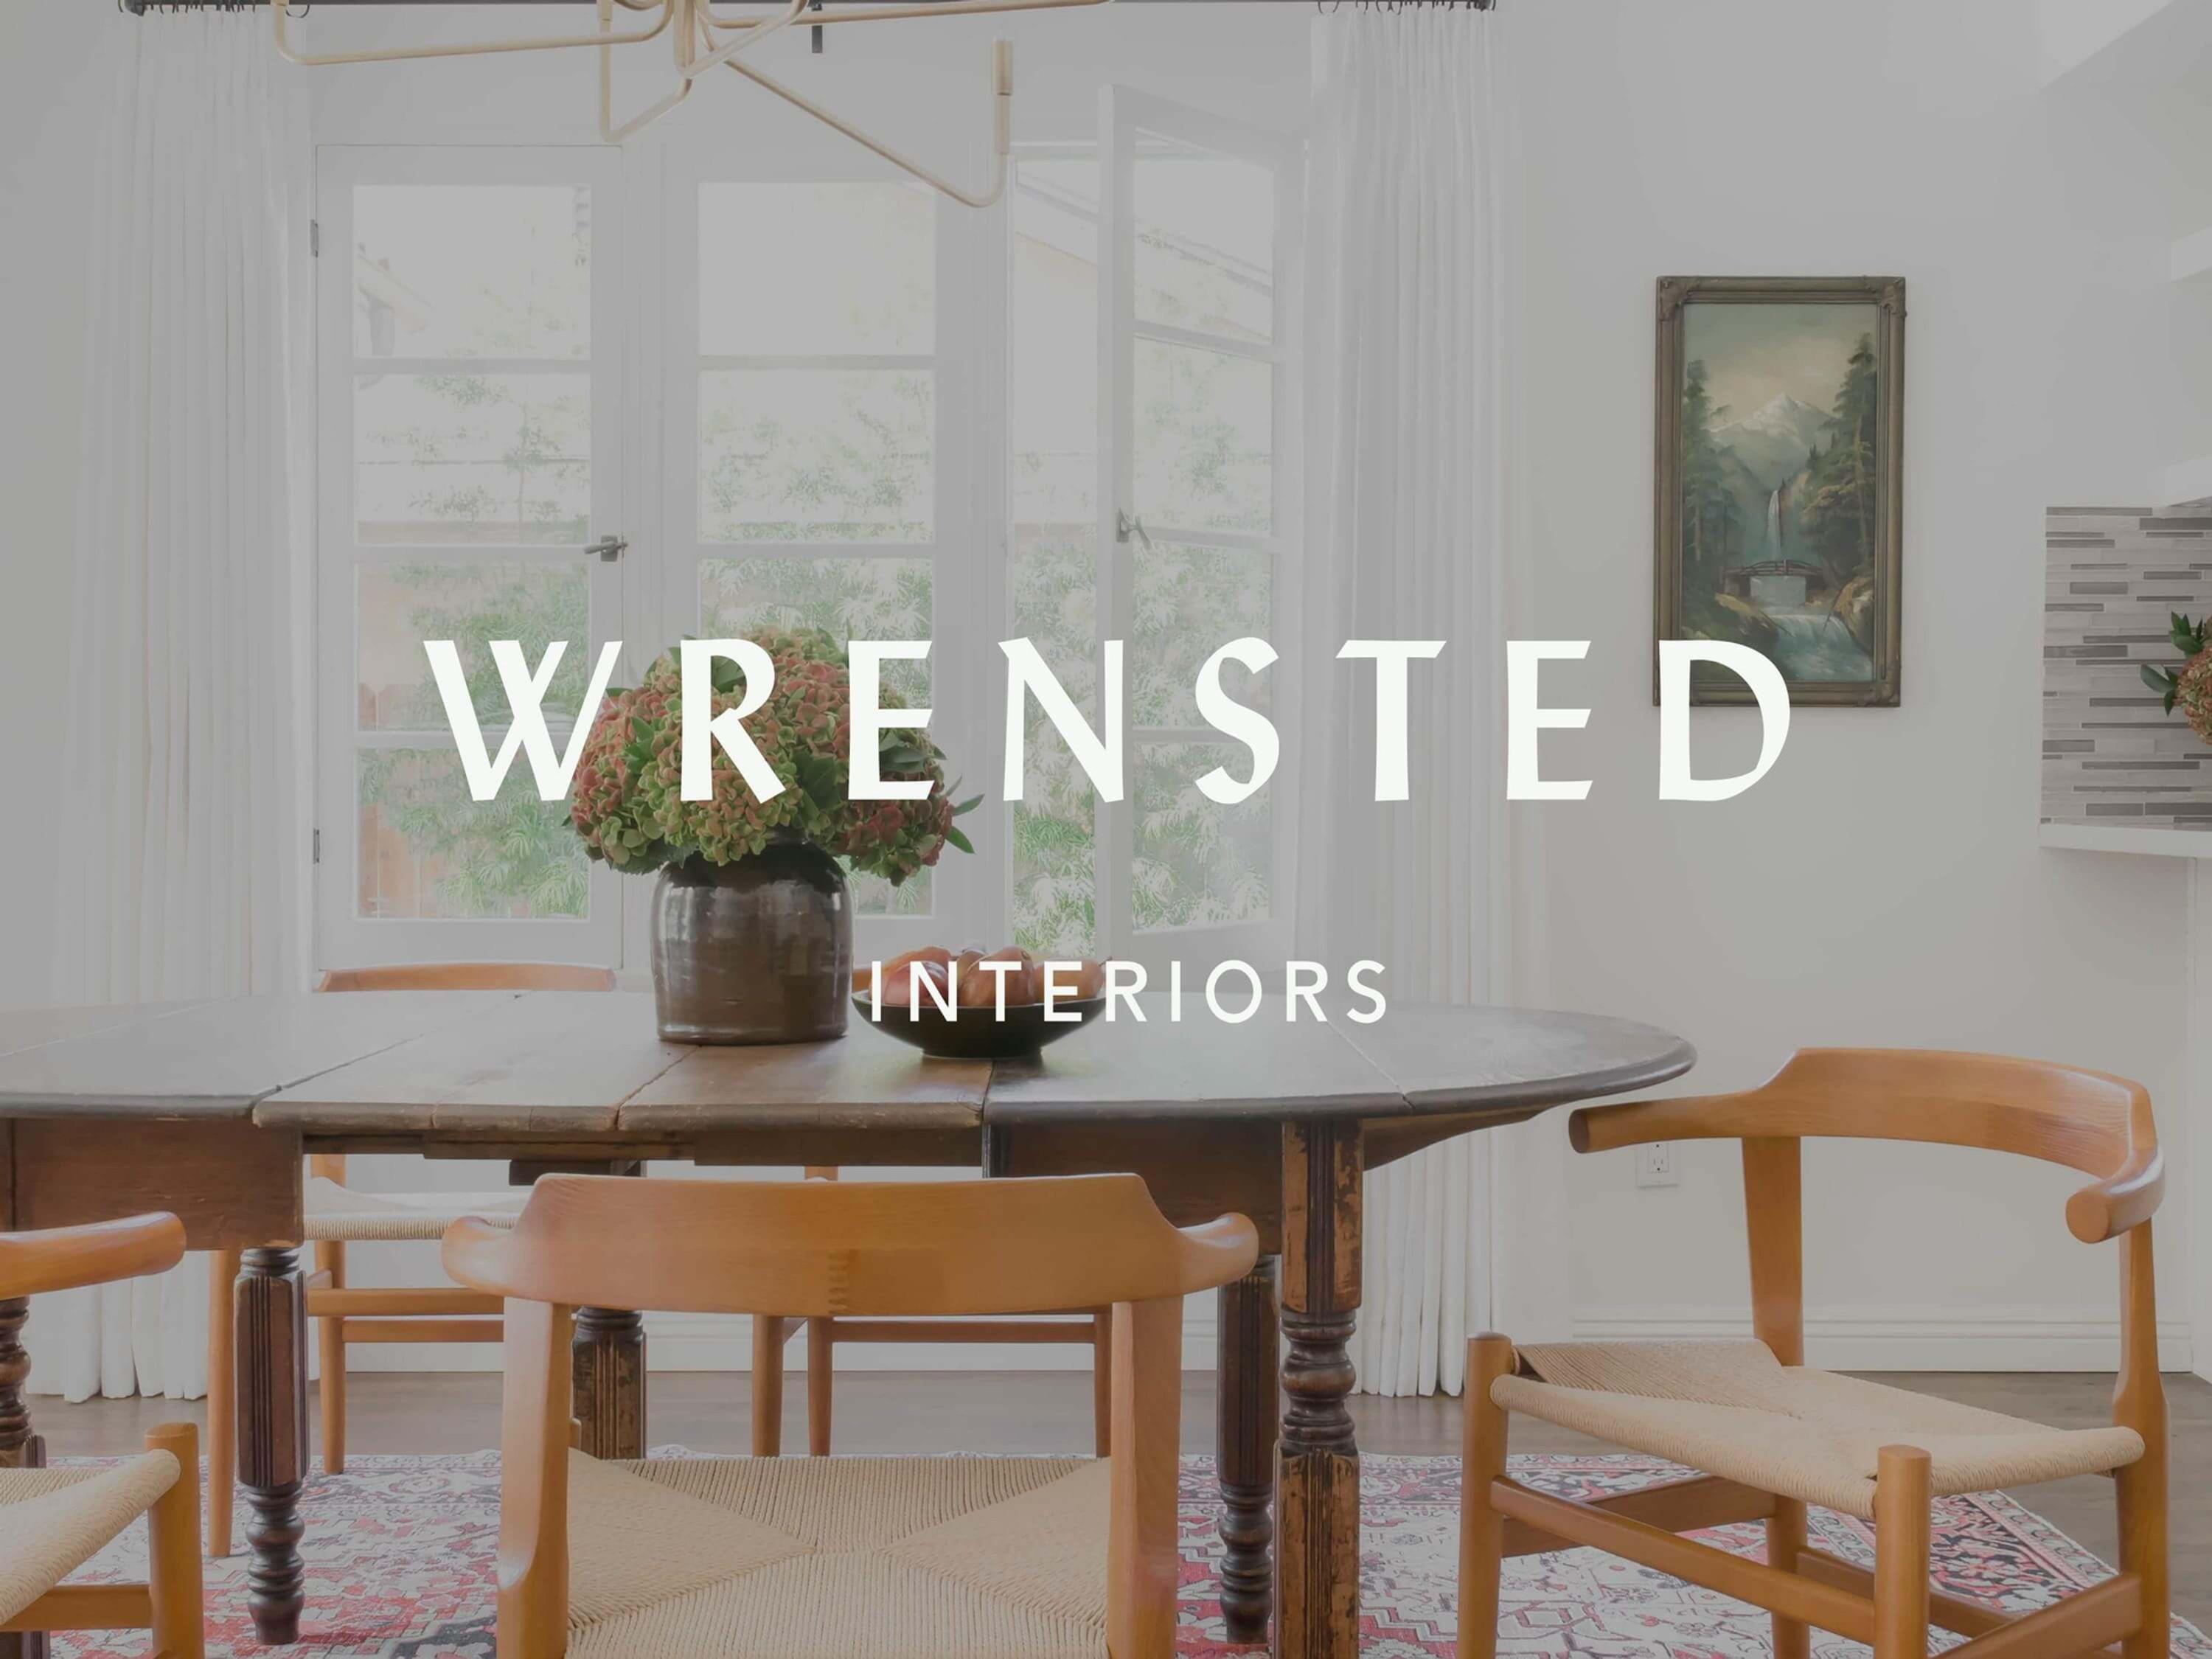 Product: Wrensted Interiors | Designed by Quixotic Design Co.